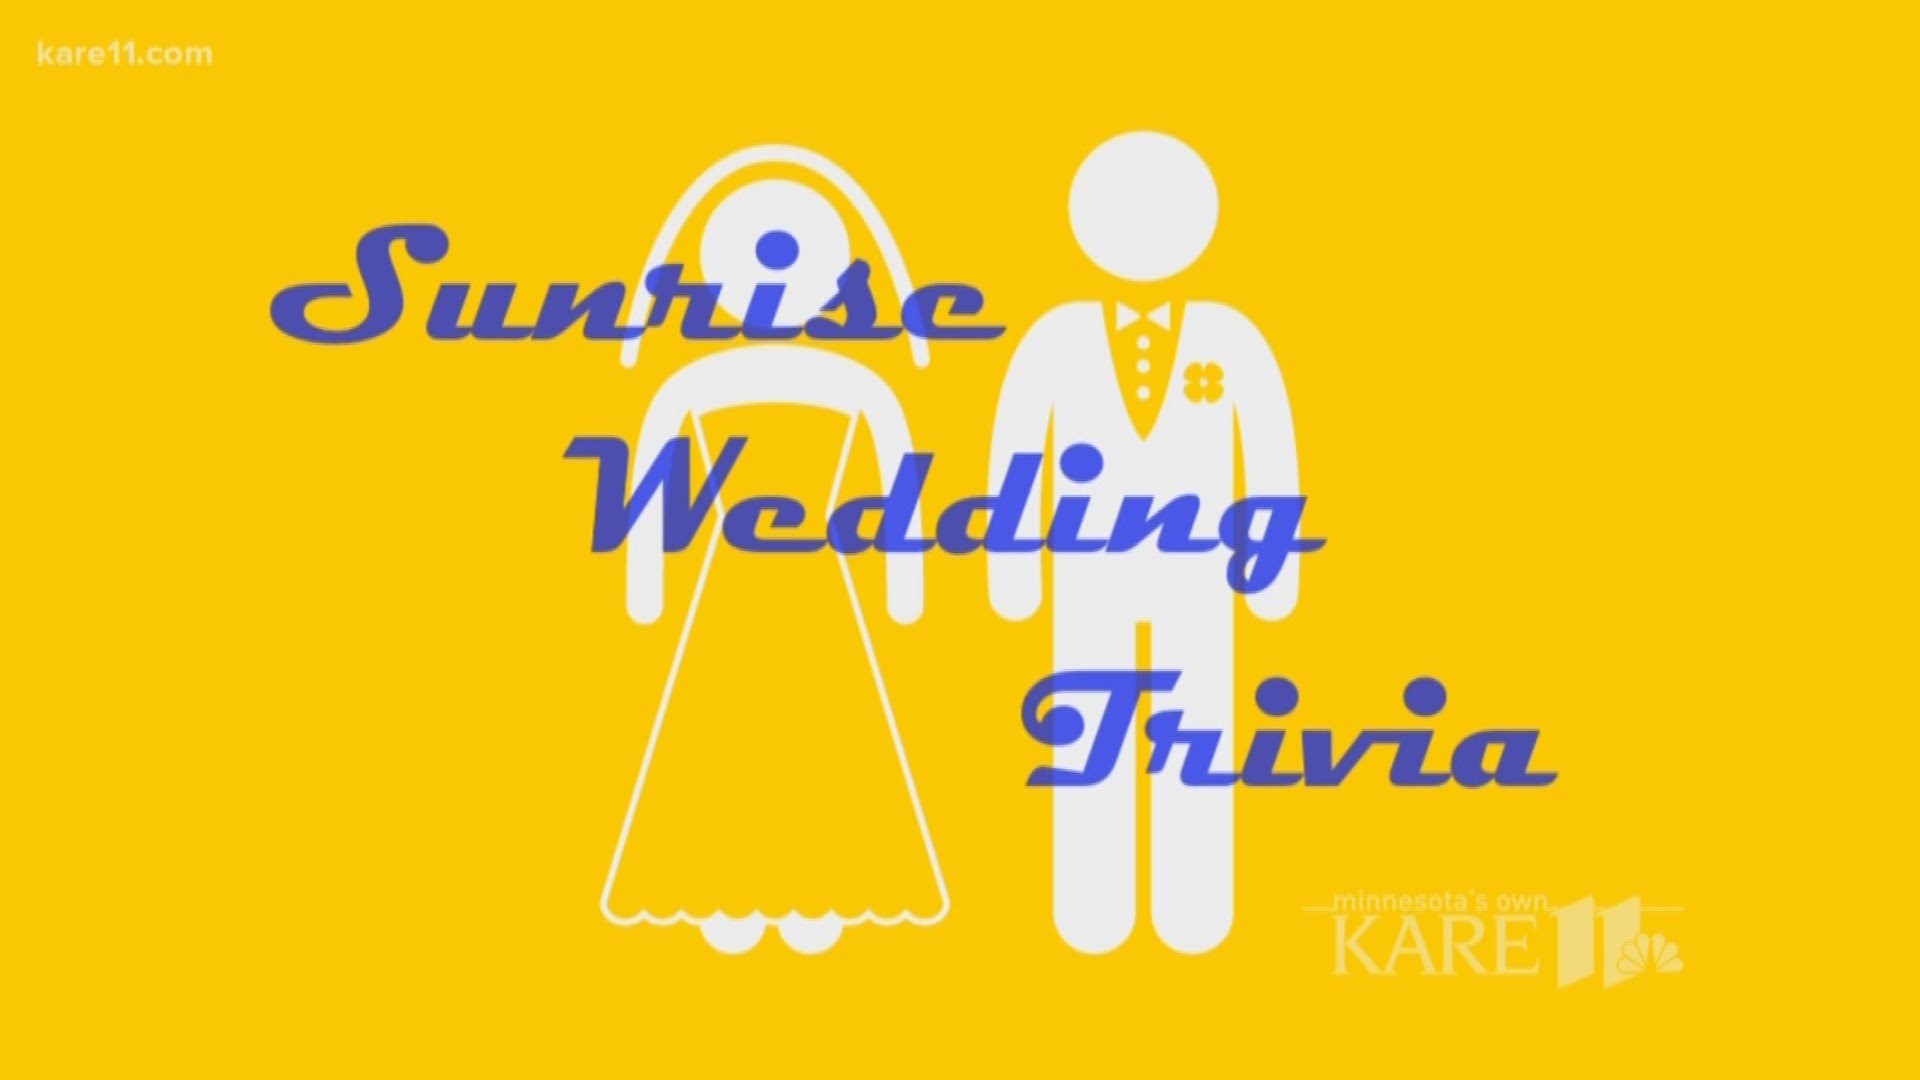 We came up with our own wedding game show to find out how much our anchors know about wedding traditions.